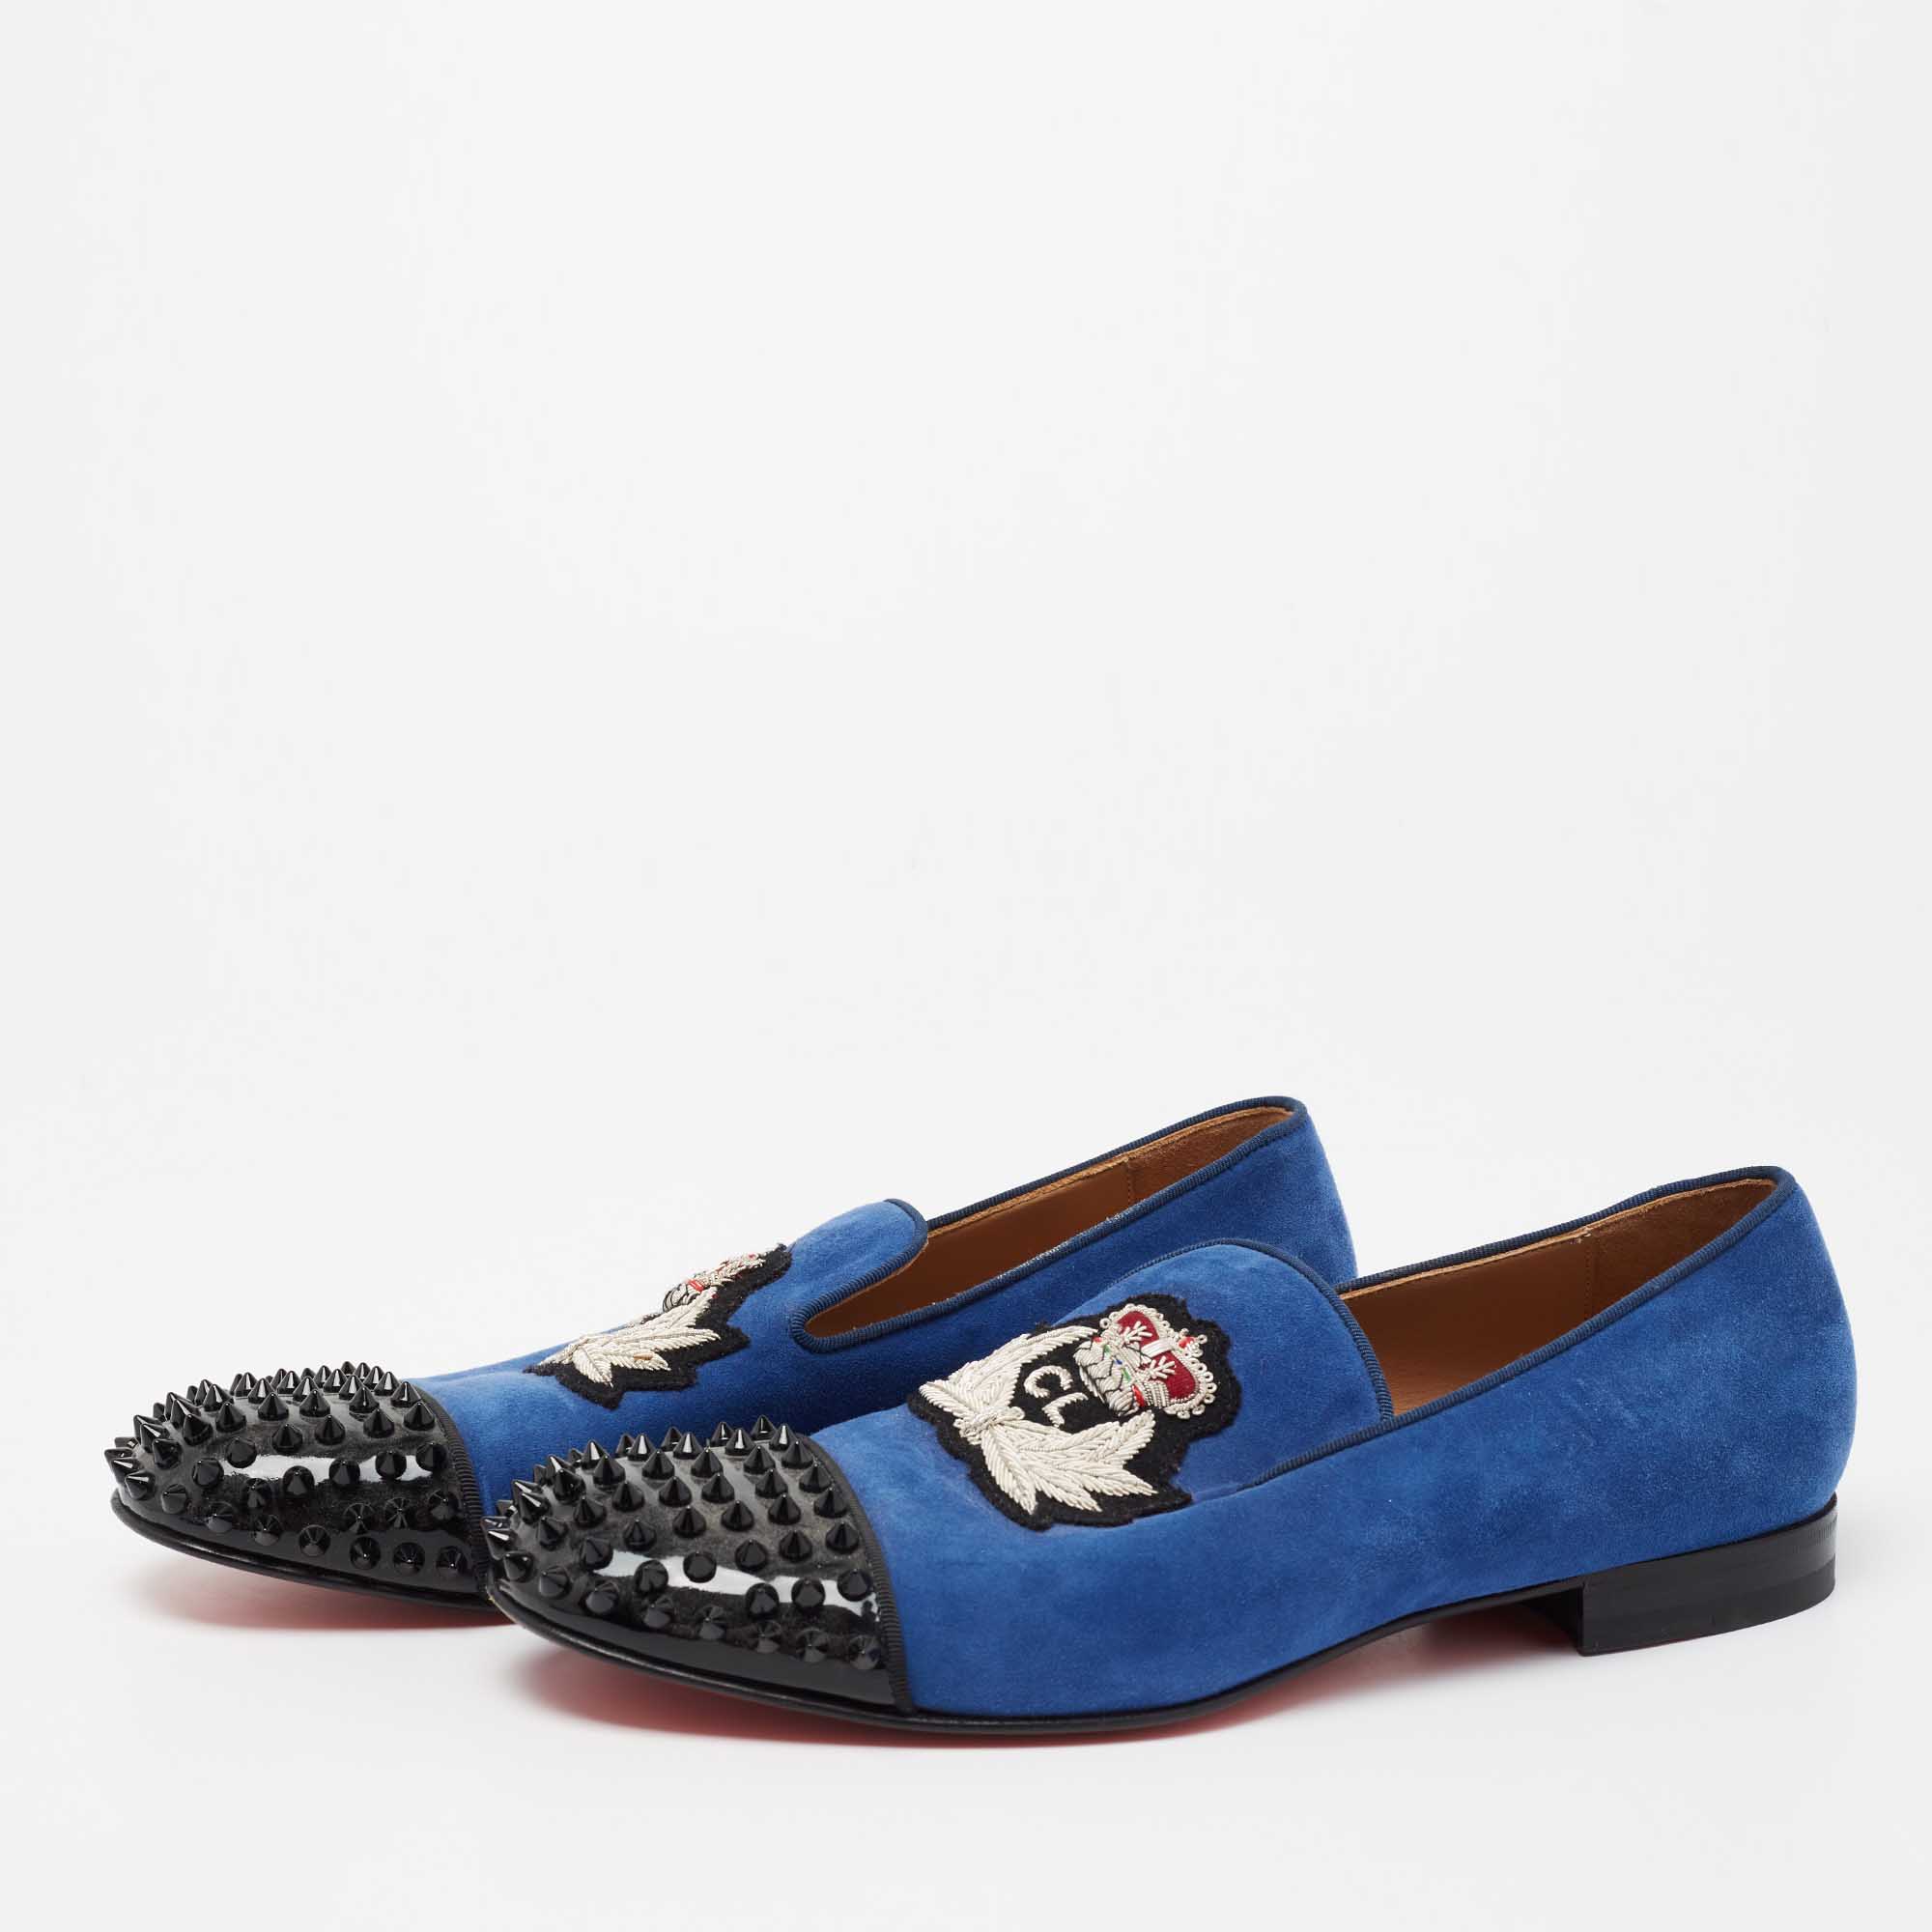 

Christian Louboutin Blue/Black Suede and Patent Leather Harvanana Spiked Smoking Slippers Size